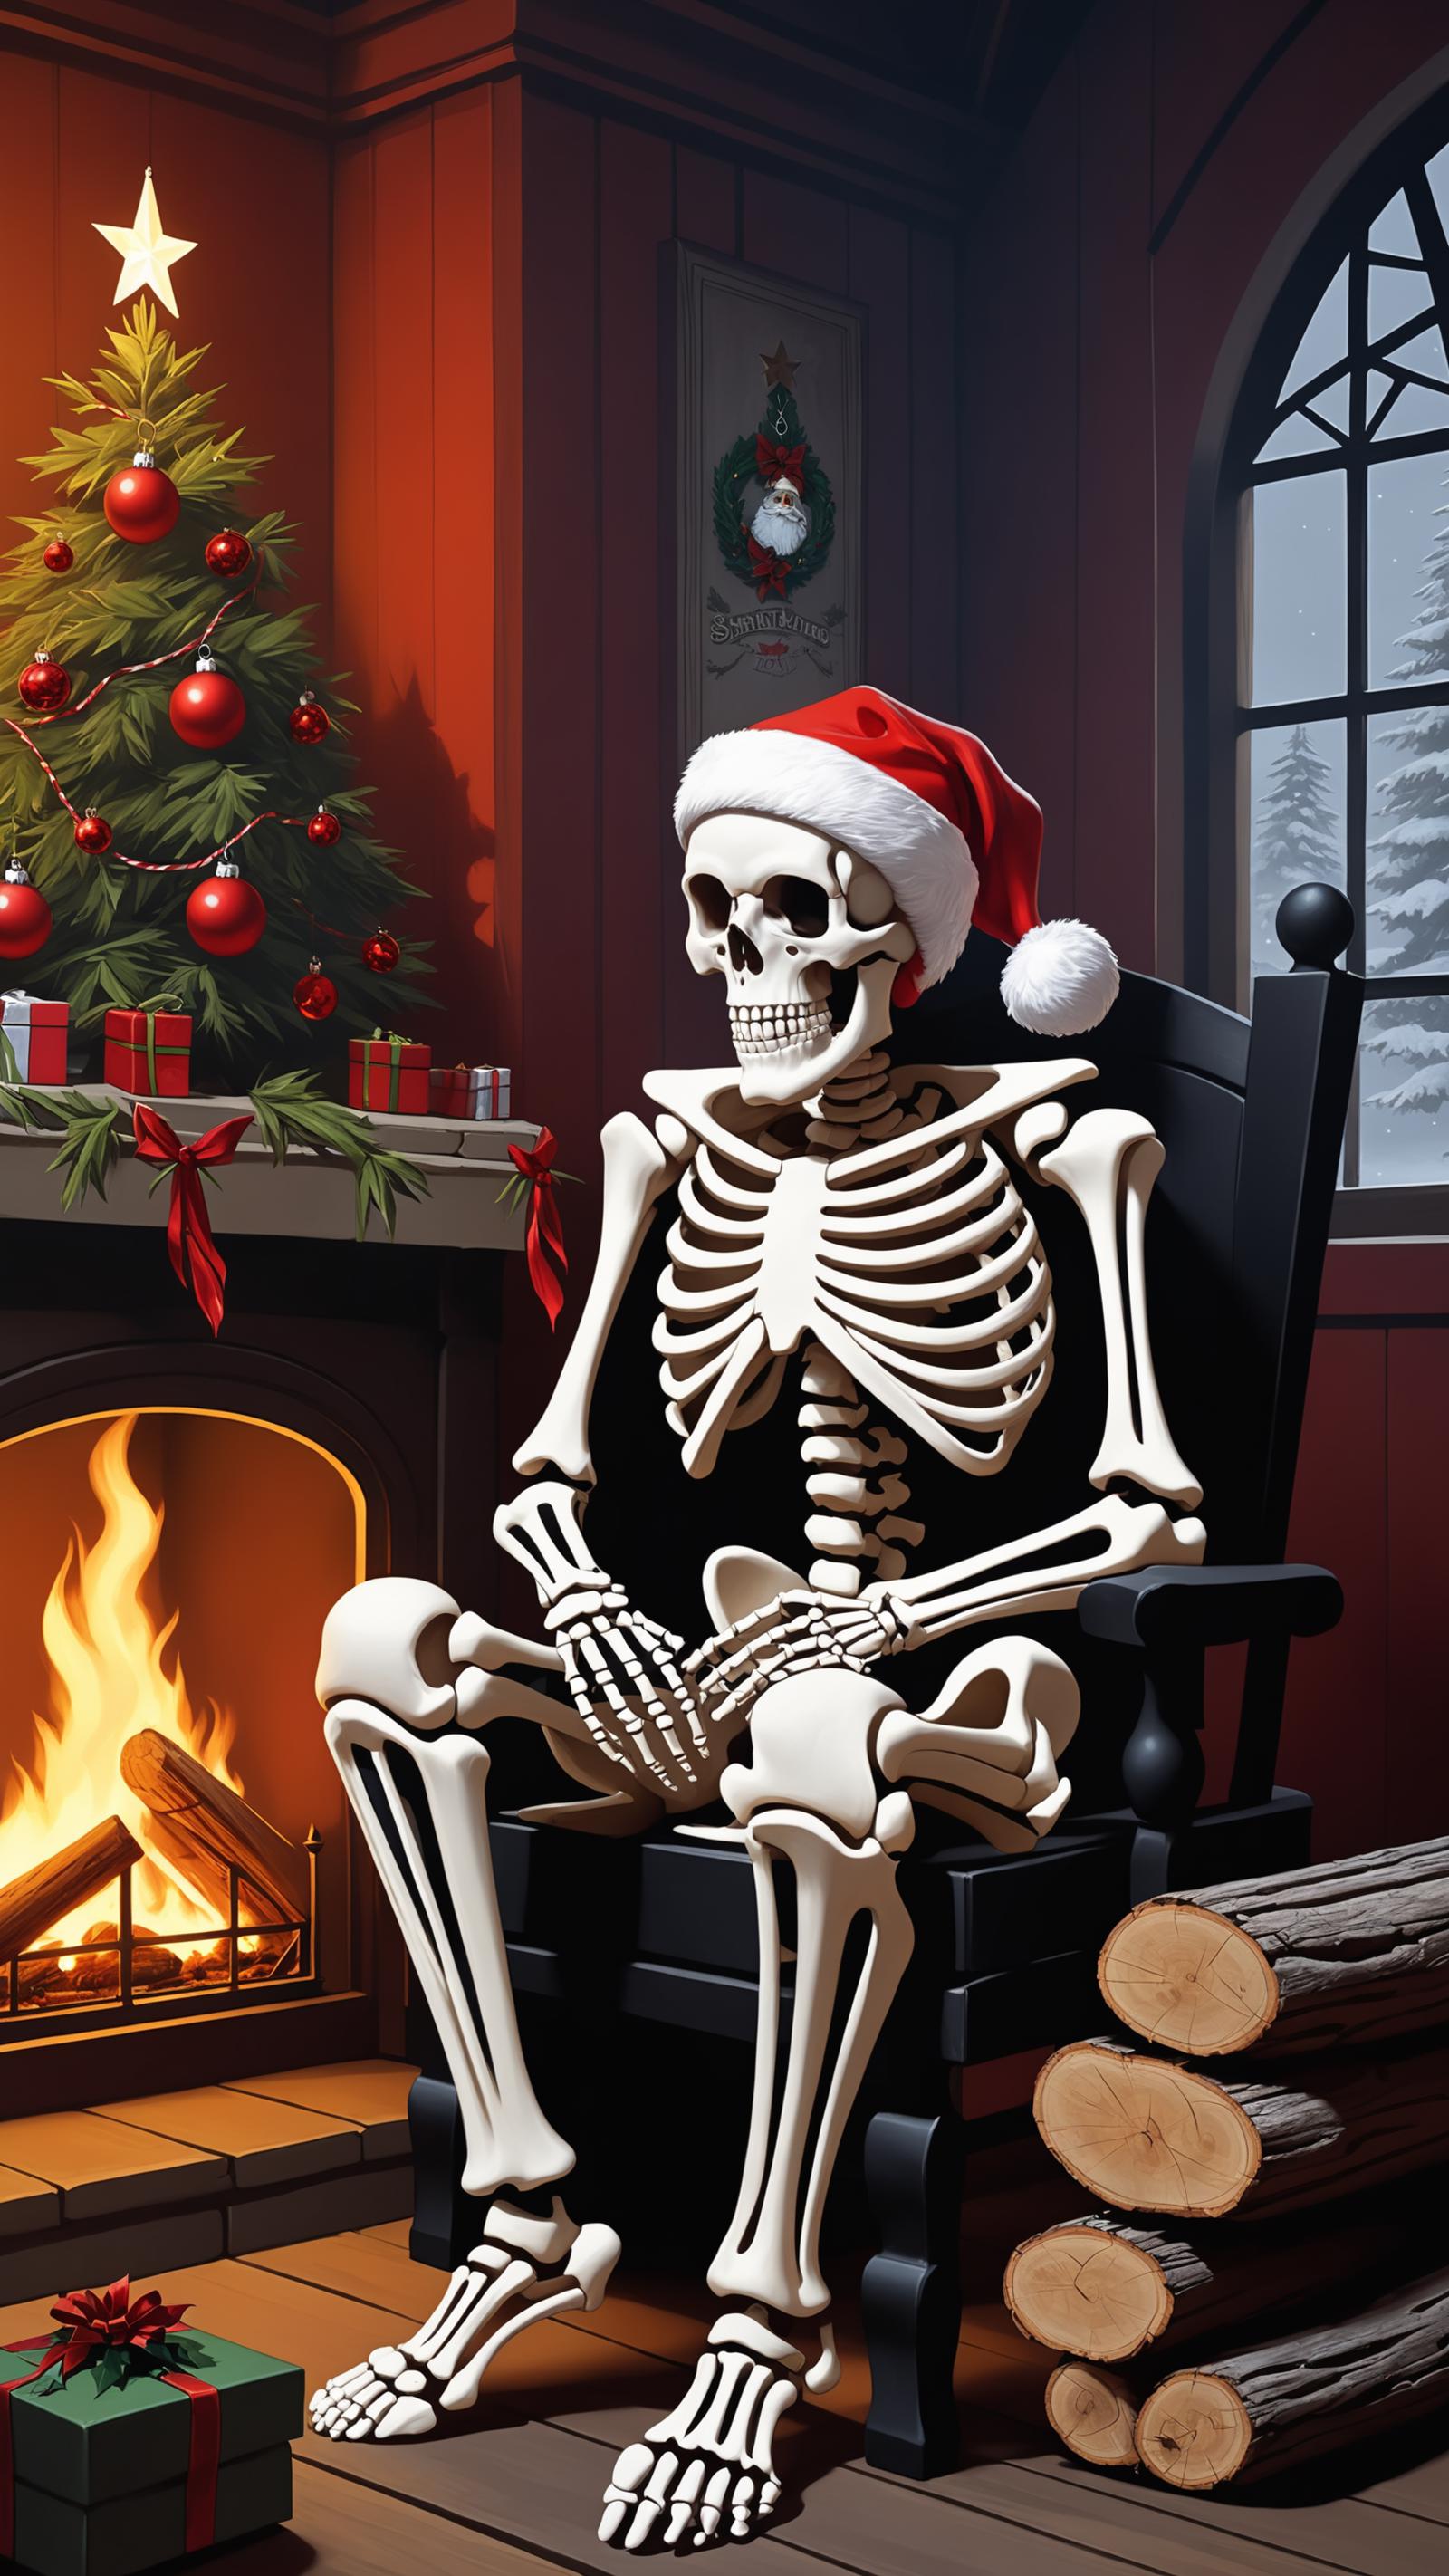 A skeleton wearing a Santa hat sits on a rocking chair in front of a Christmas tree.